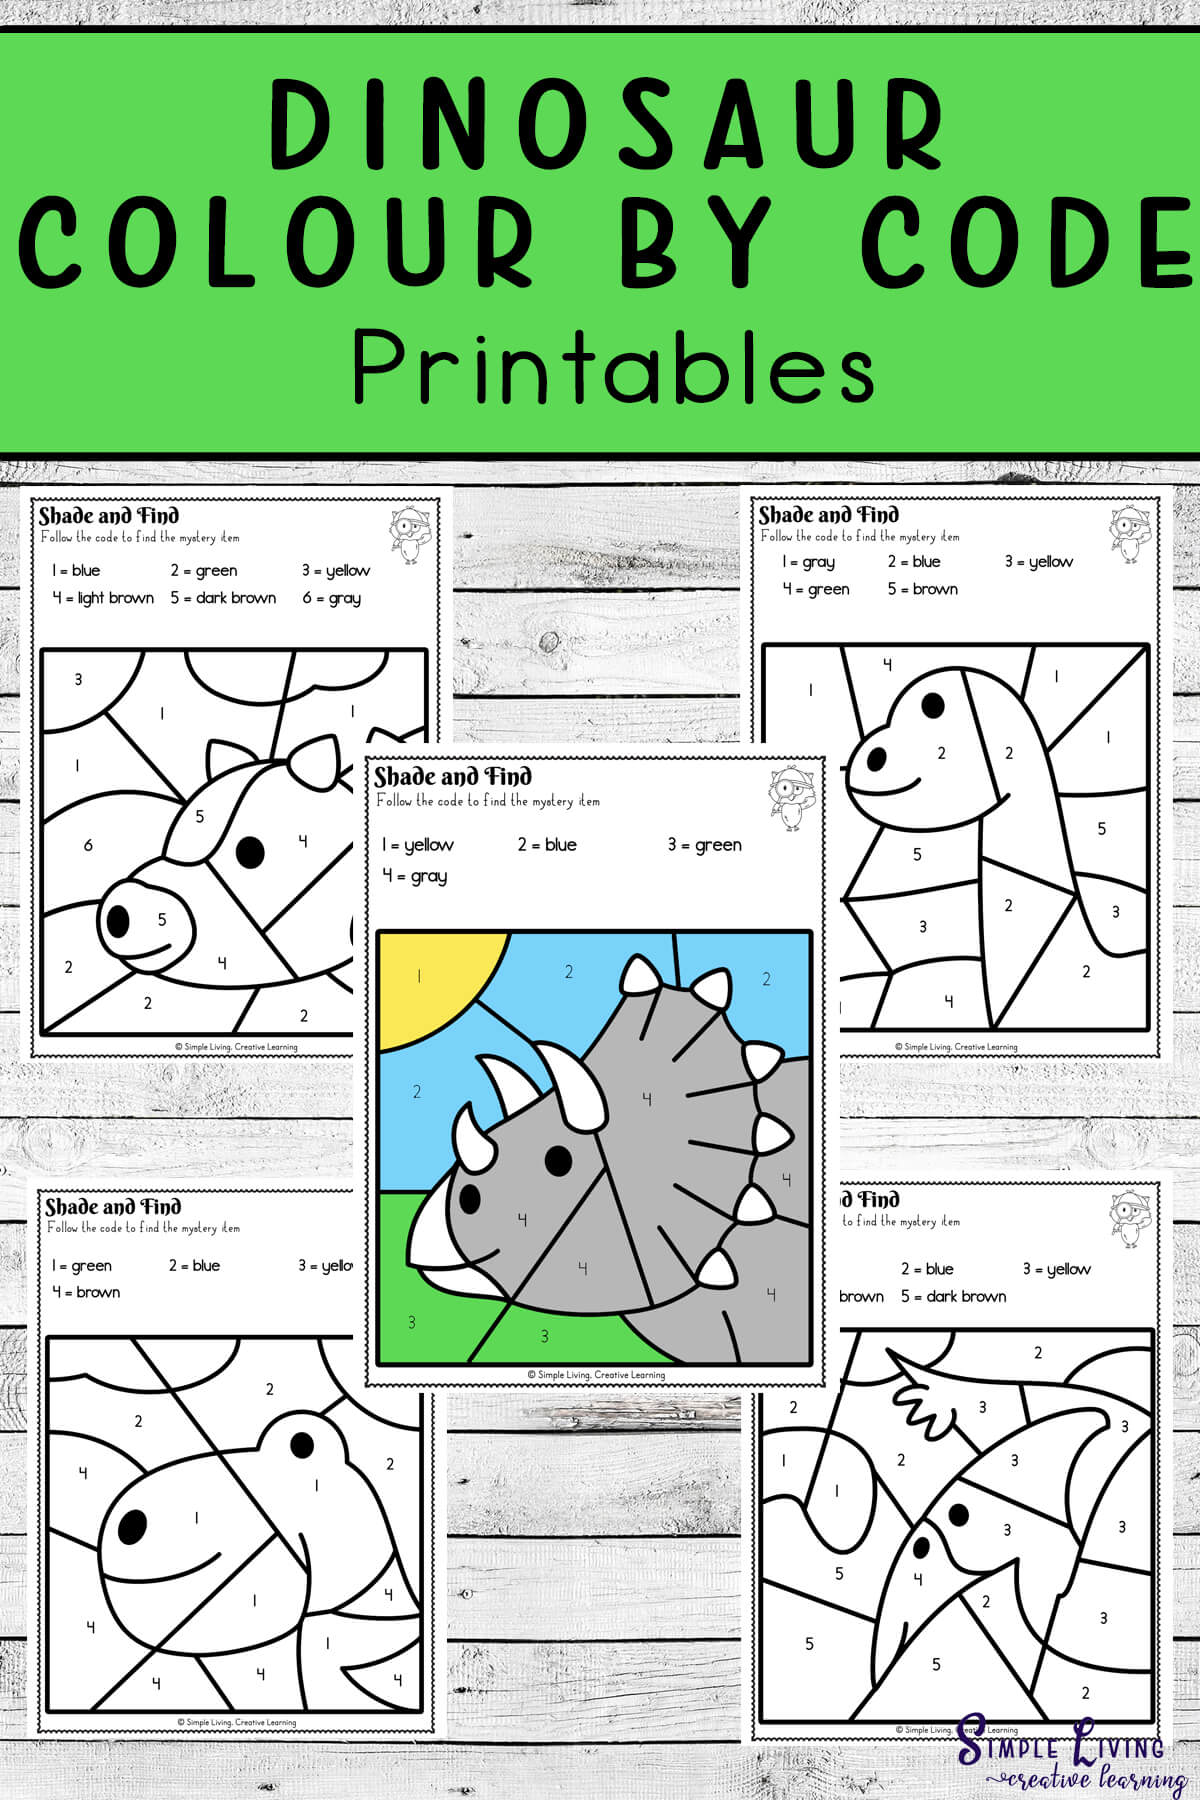 Dinosaur Colour By Code Worksheets